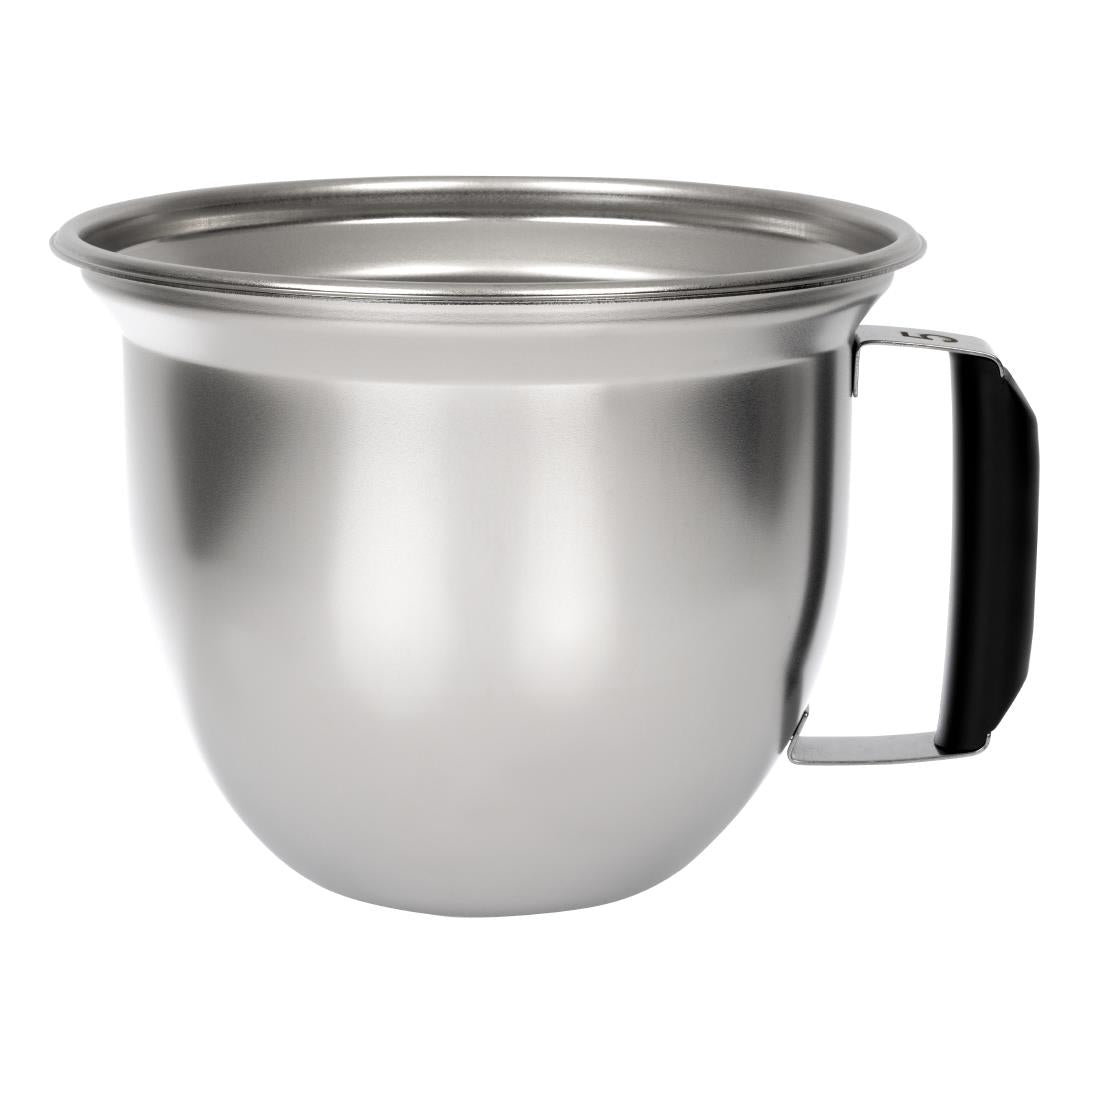 AN604 Matfer 5Ltr Stainless Steel Bowl with Handle JD Catering Equipment Solutions Ltd